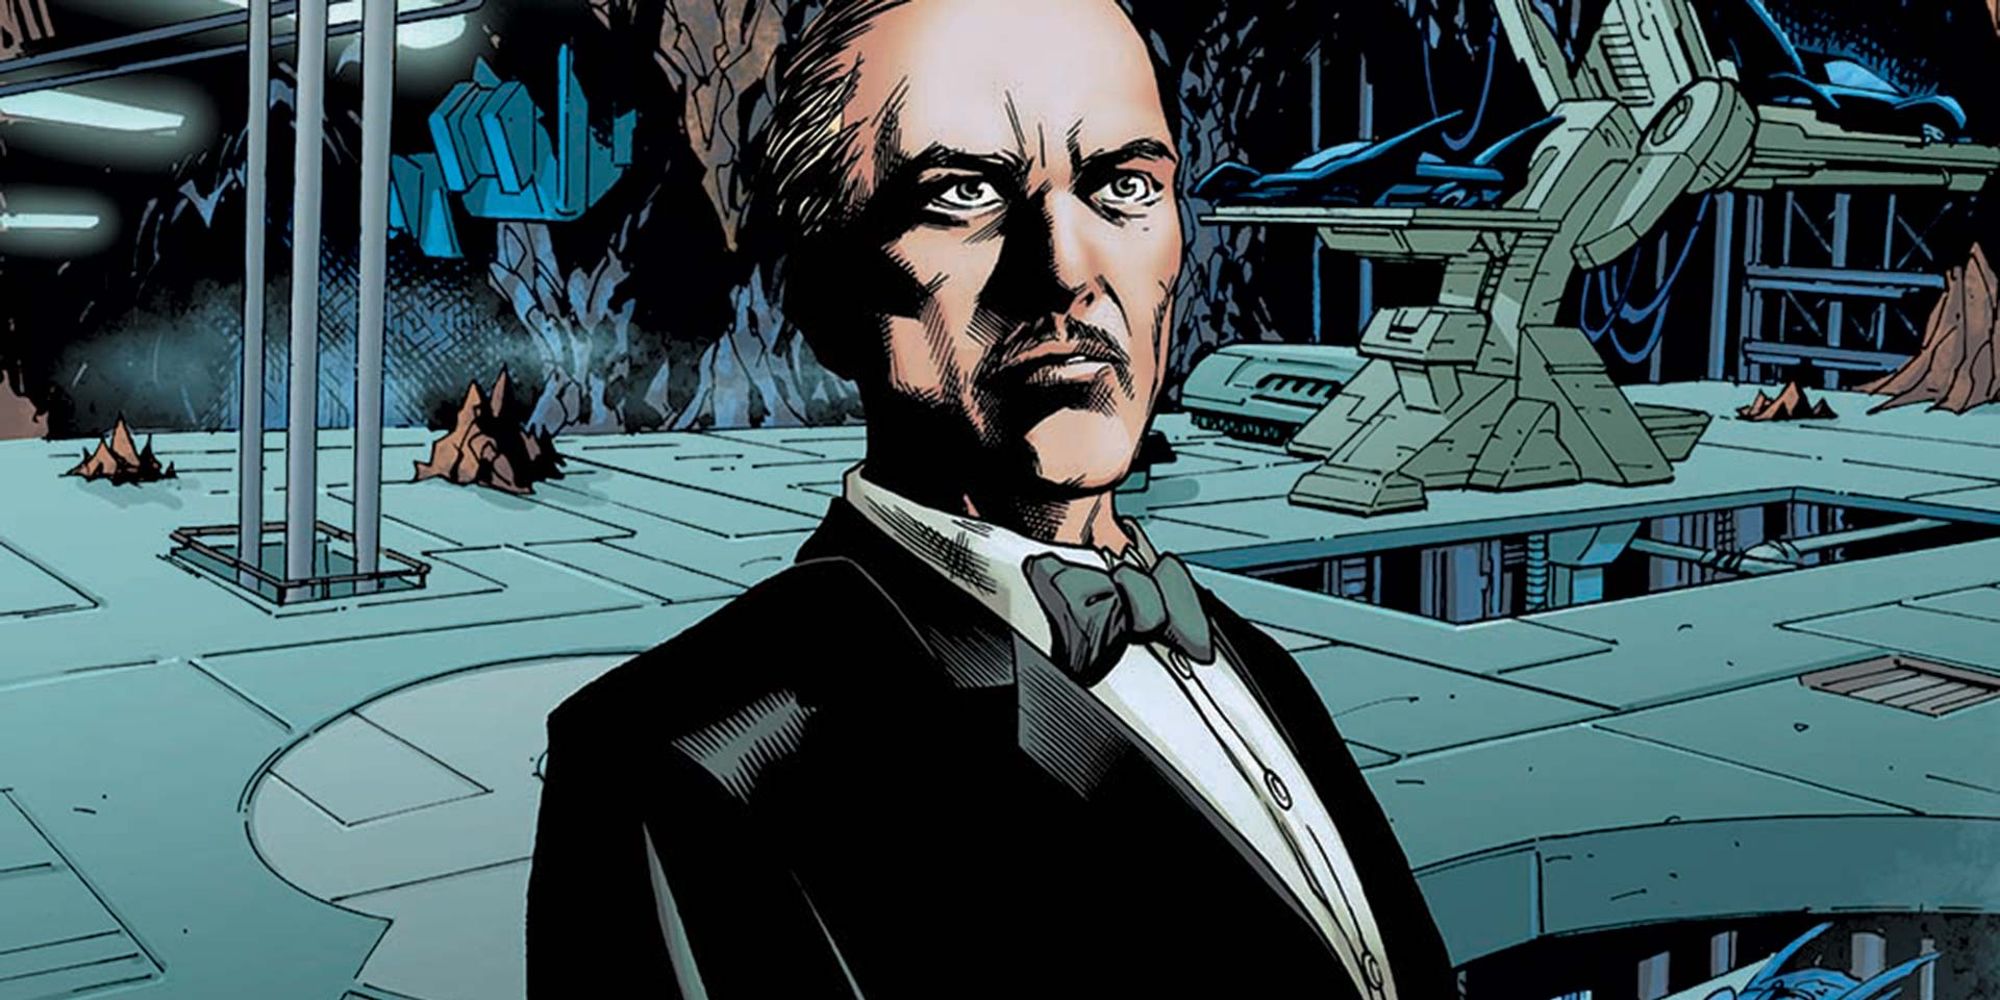 Alfred Pennyworth inside the Batcave in DC comics